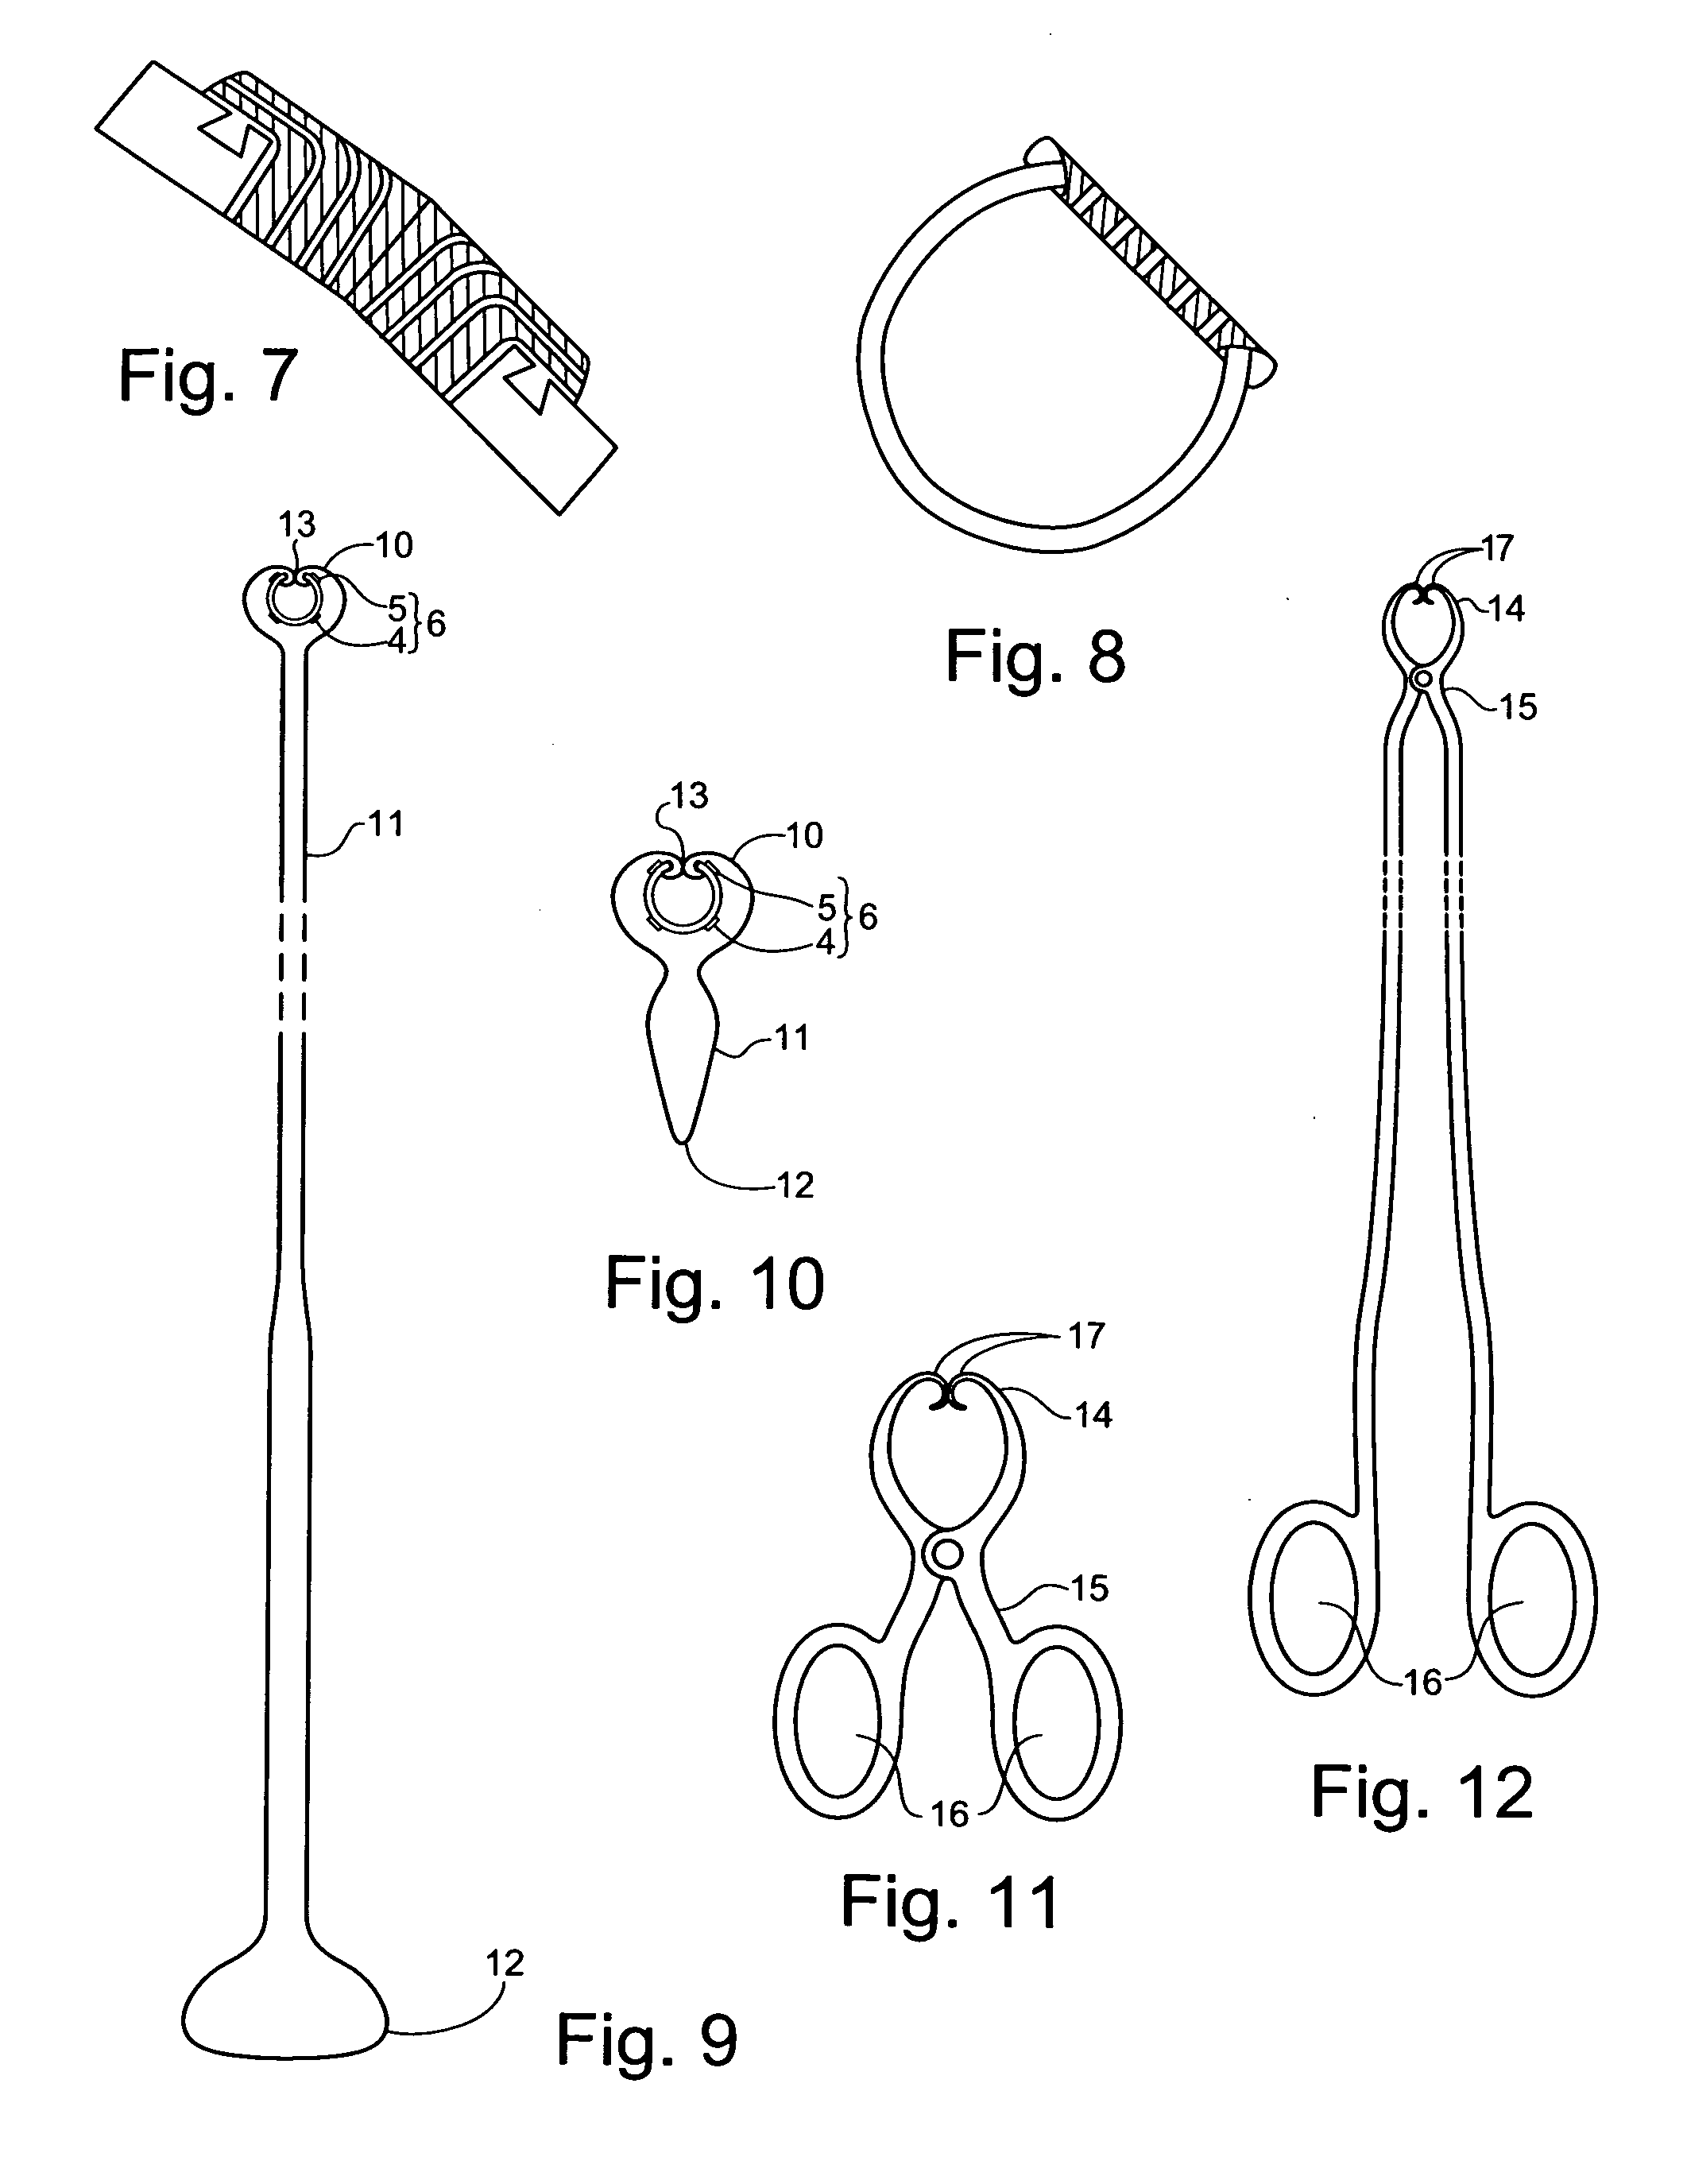 Integrated system for the ballistic and nonballistic infixion and retrieval of implants